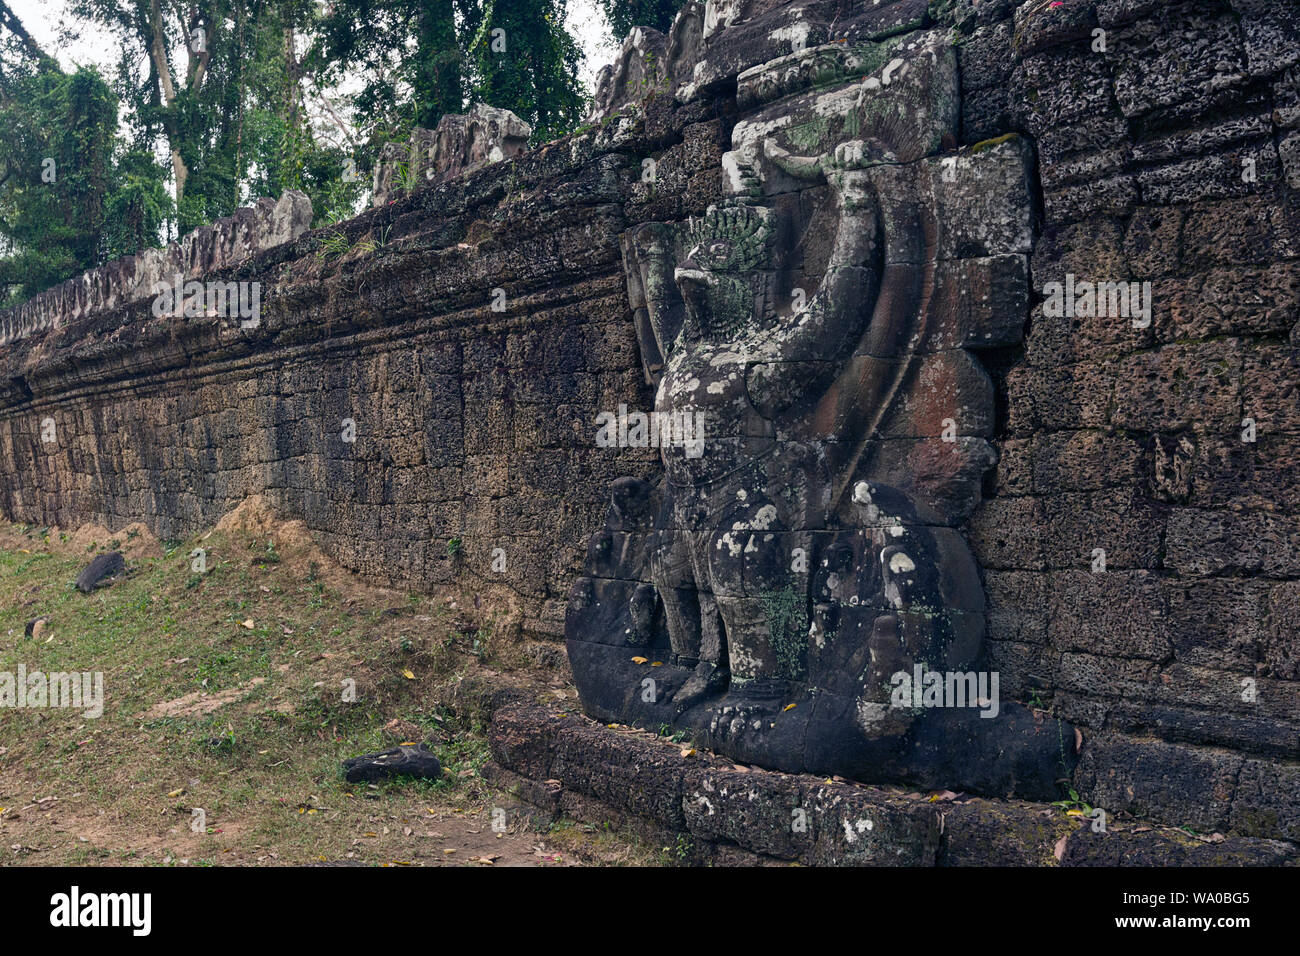 garudas holding nagas in Preah Khan temple, Khmer ruins in Angkor Thom,  UNESCO World Heritage Site in Siem Reap Cambodia Stock Photo